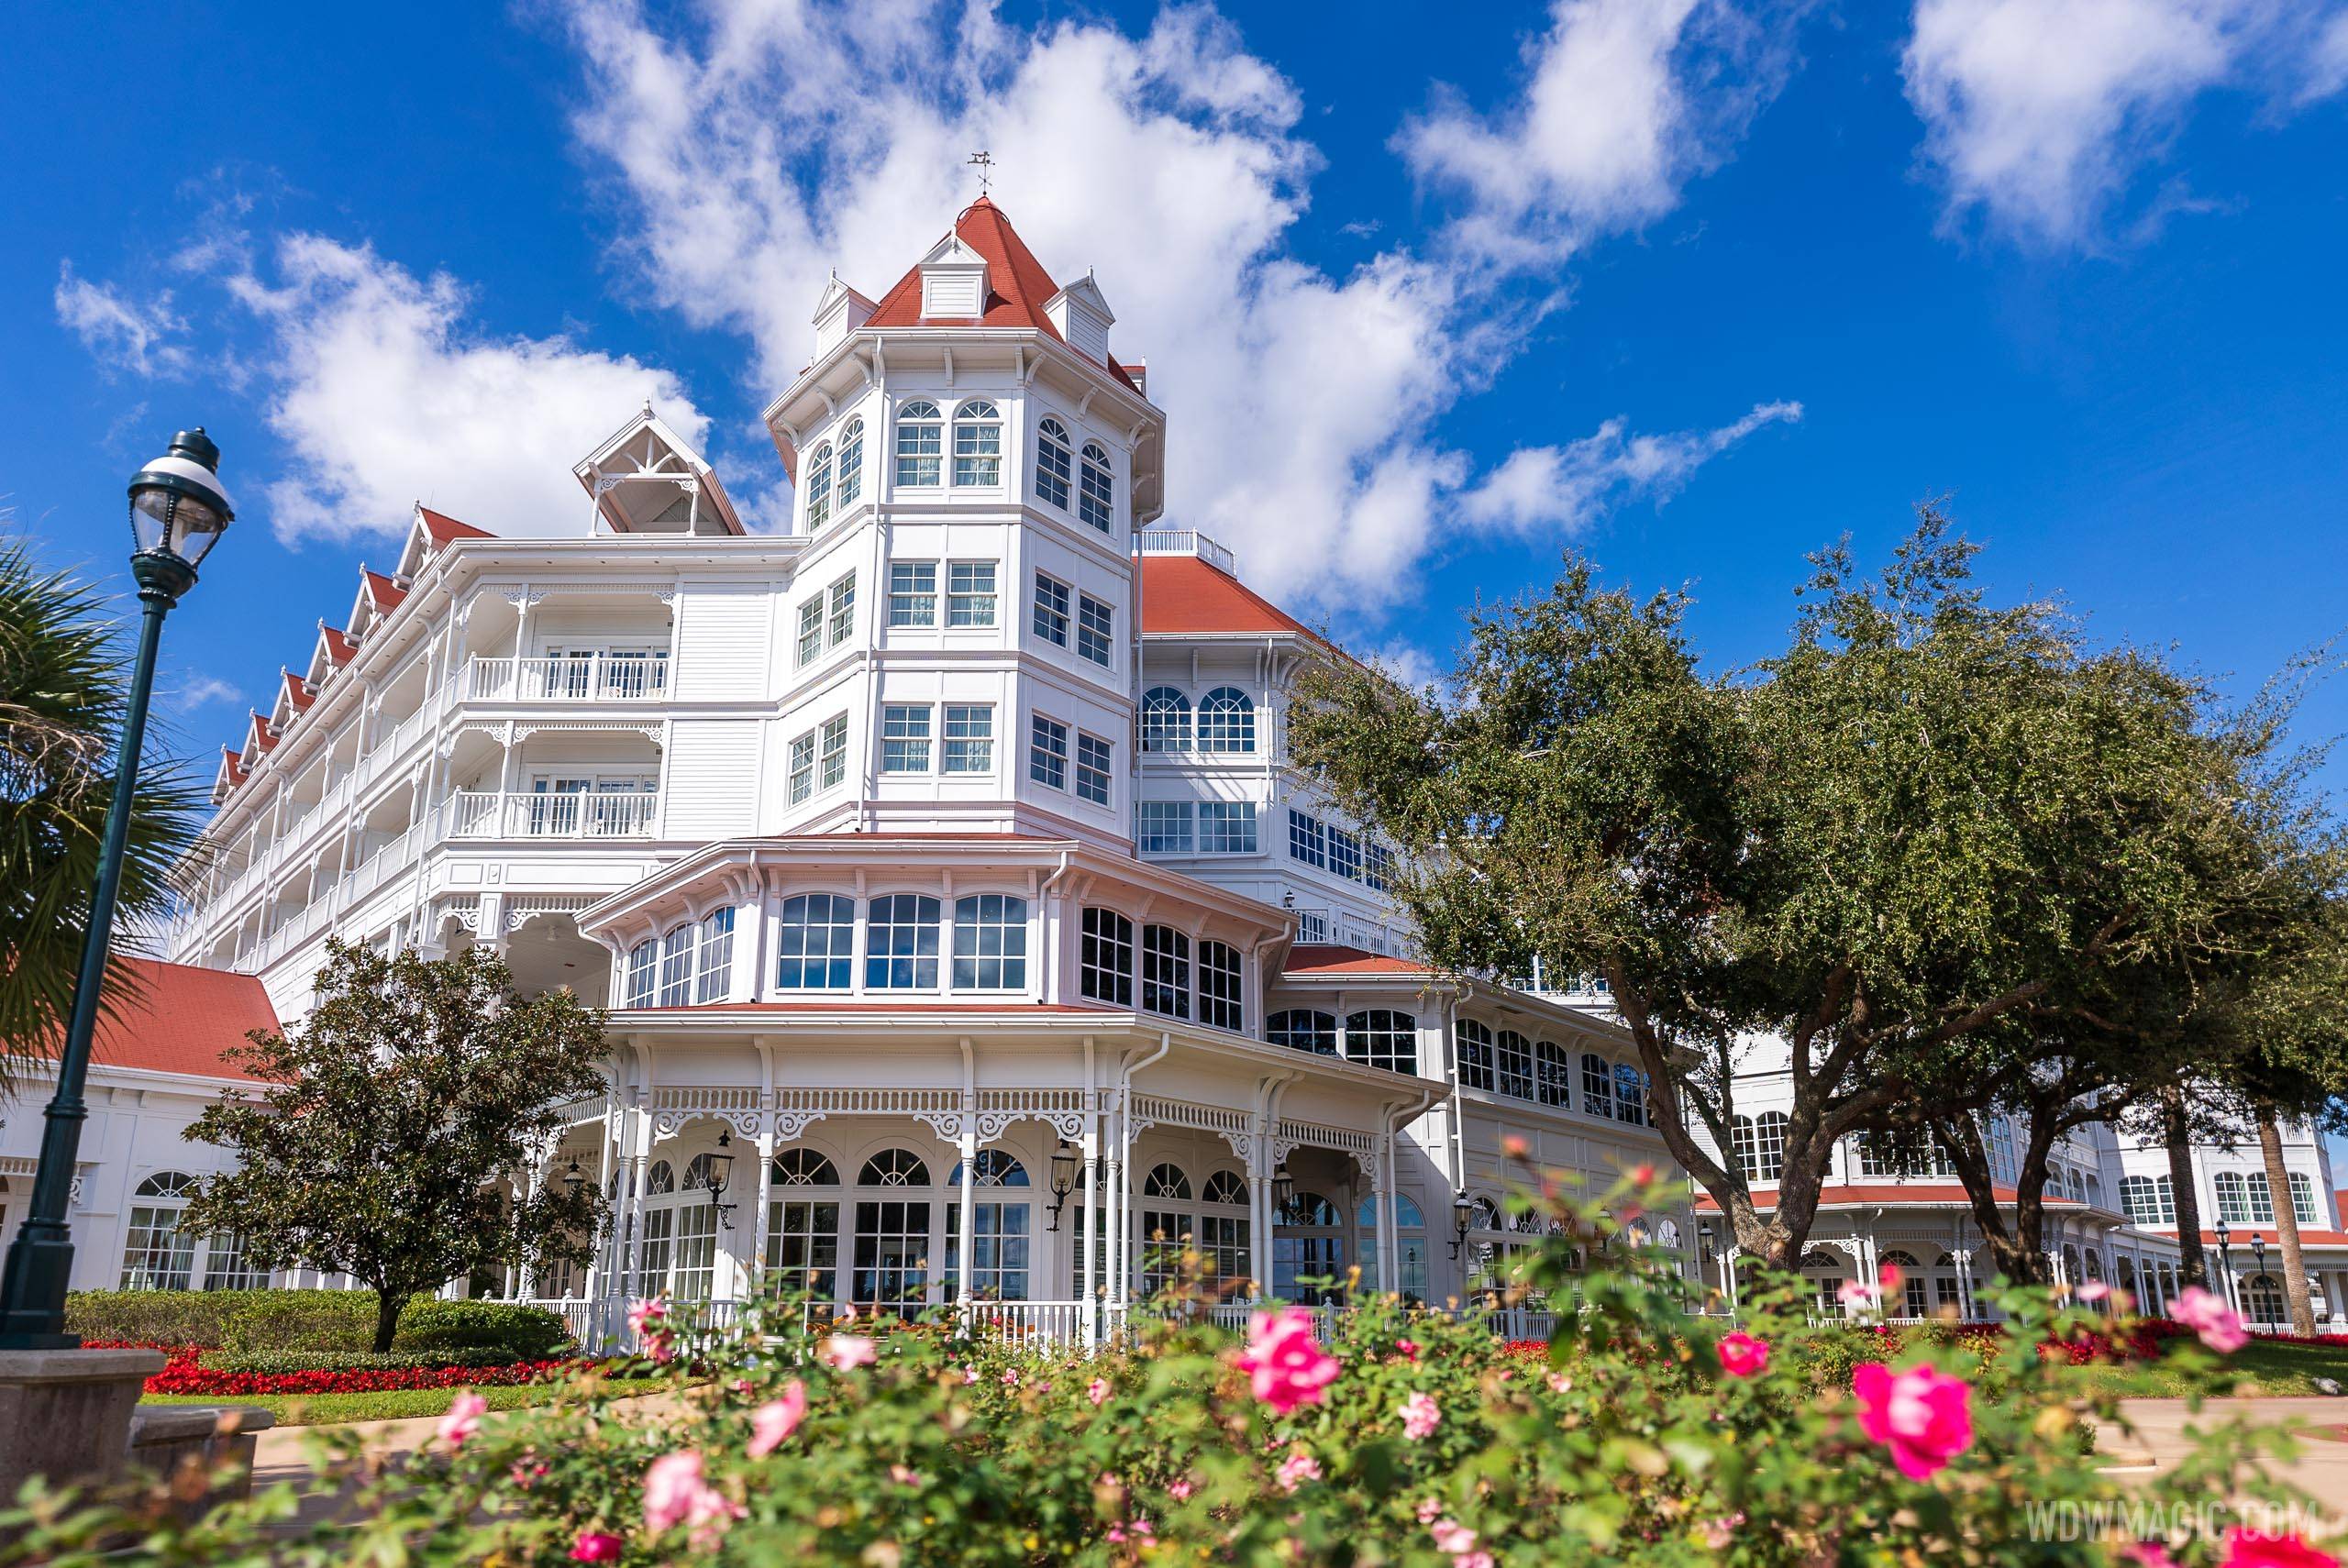 Grand Floridian Resort introduces private water taxi service